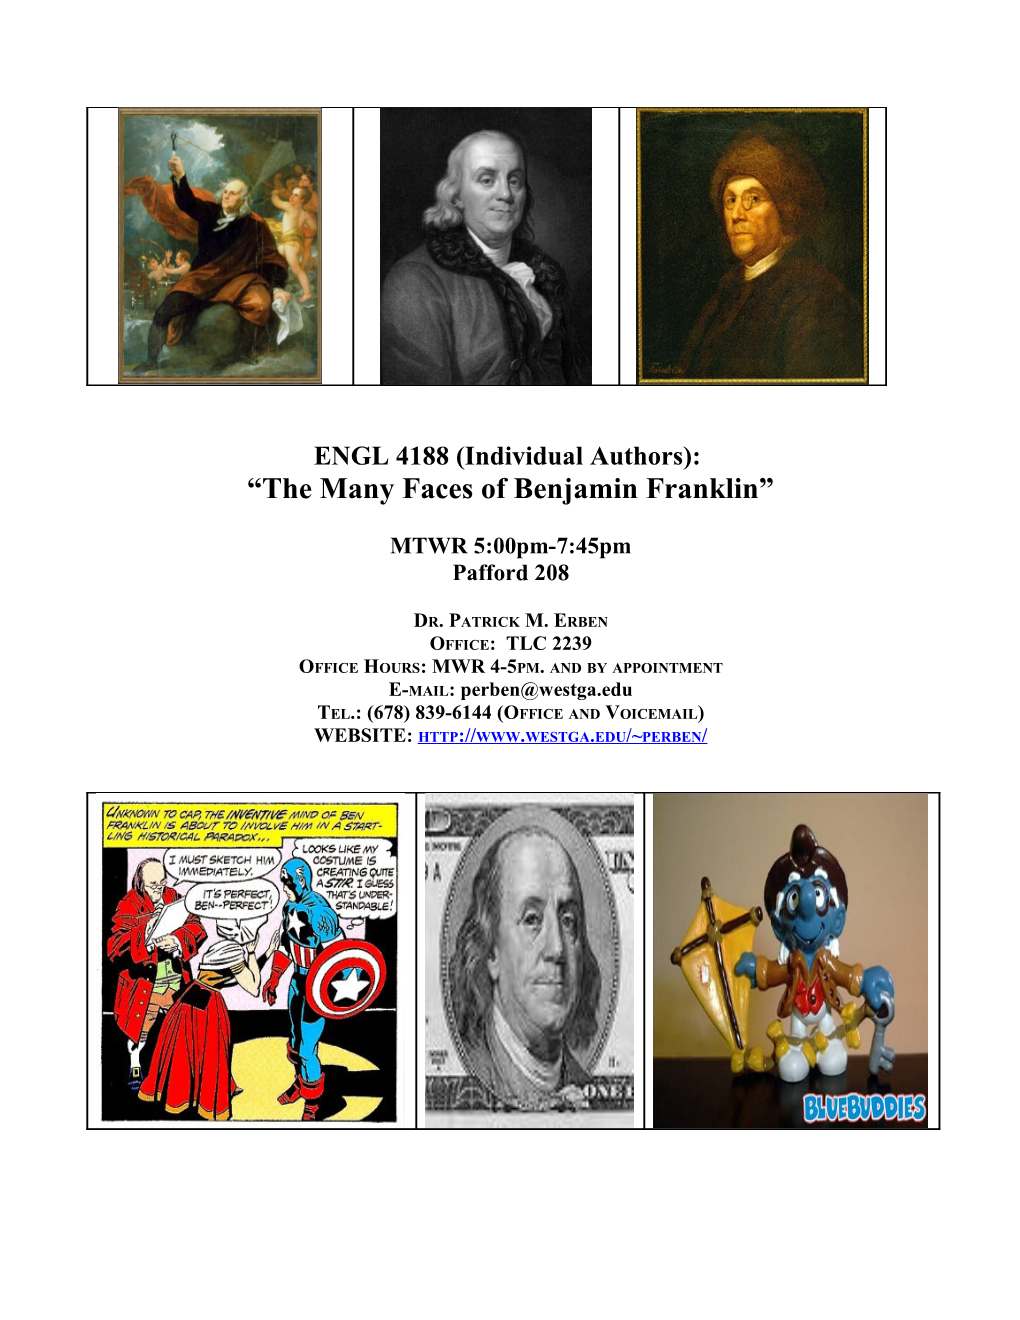 The Many Faces of Benjamin Franklin